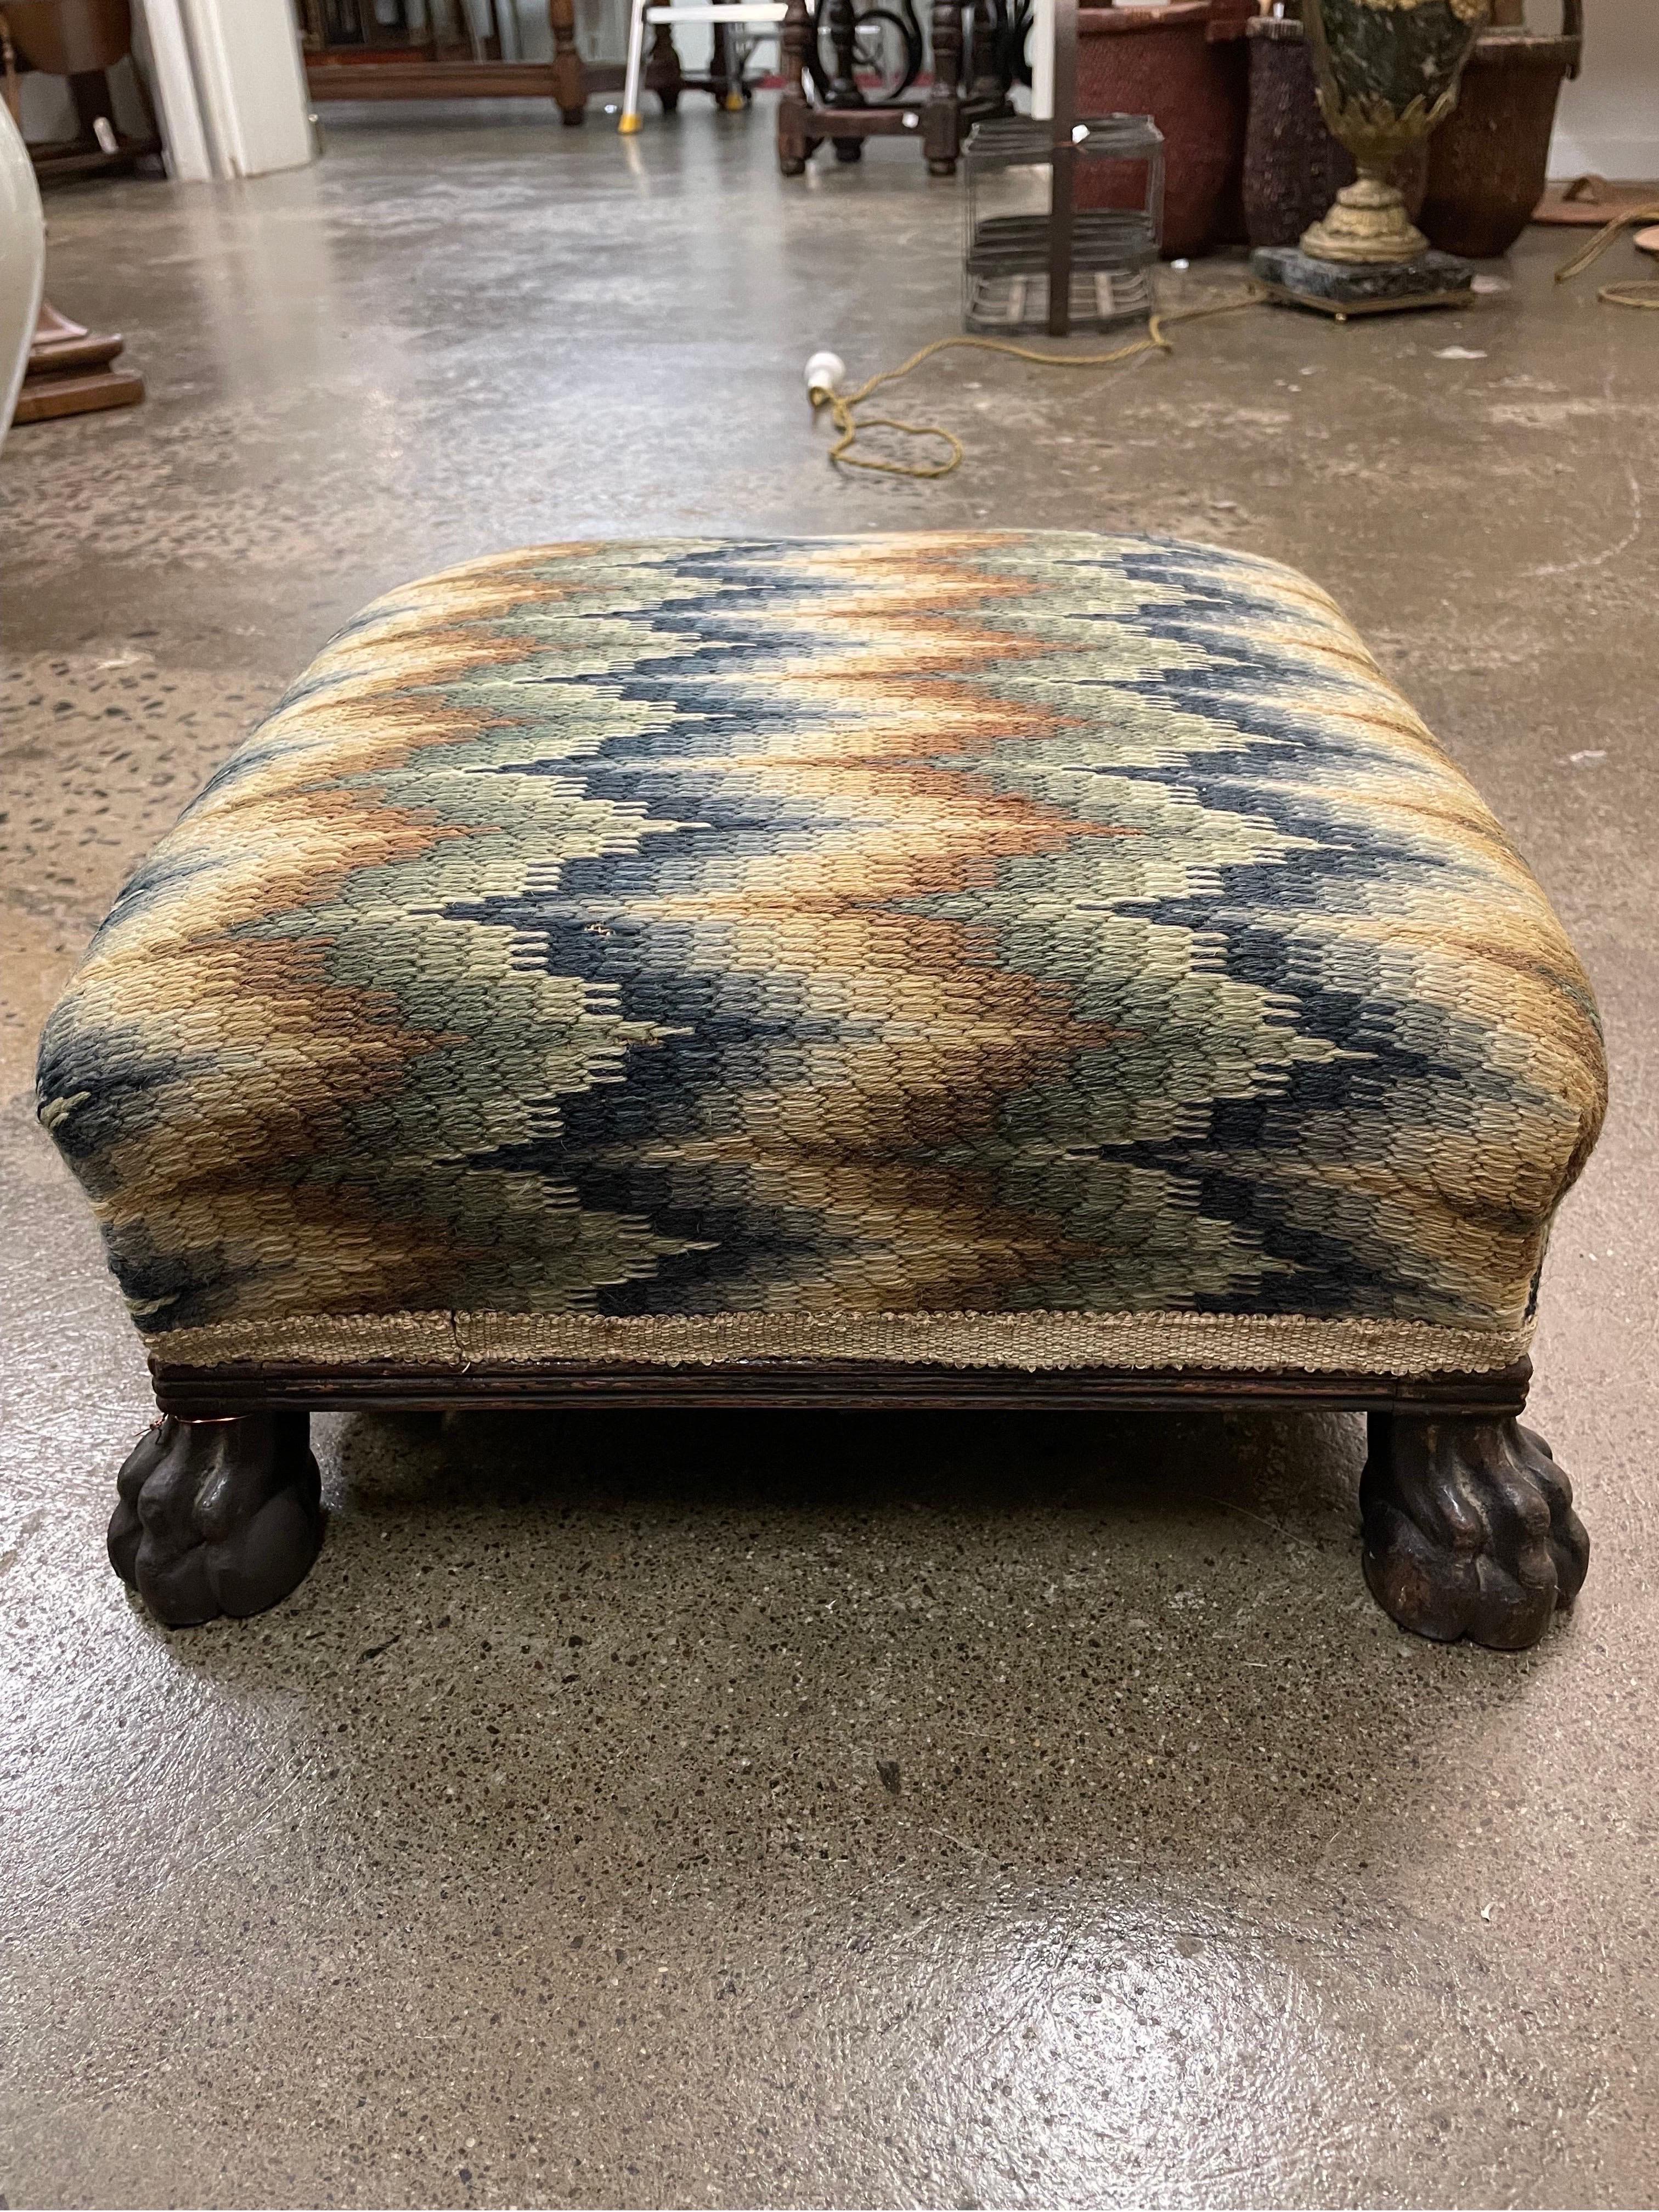 A Small Georgian Oak Footstool, Early 19th Century

With a reeded frame and raised on claw feet, covered in wool bargello needlework.

Provenance: Private New South Wales Collection.